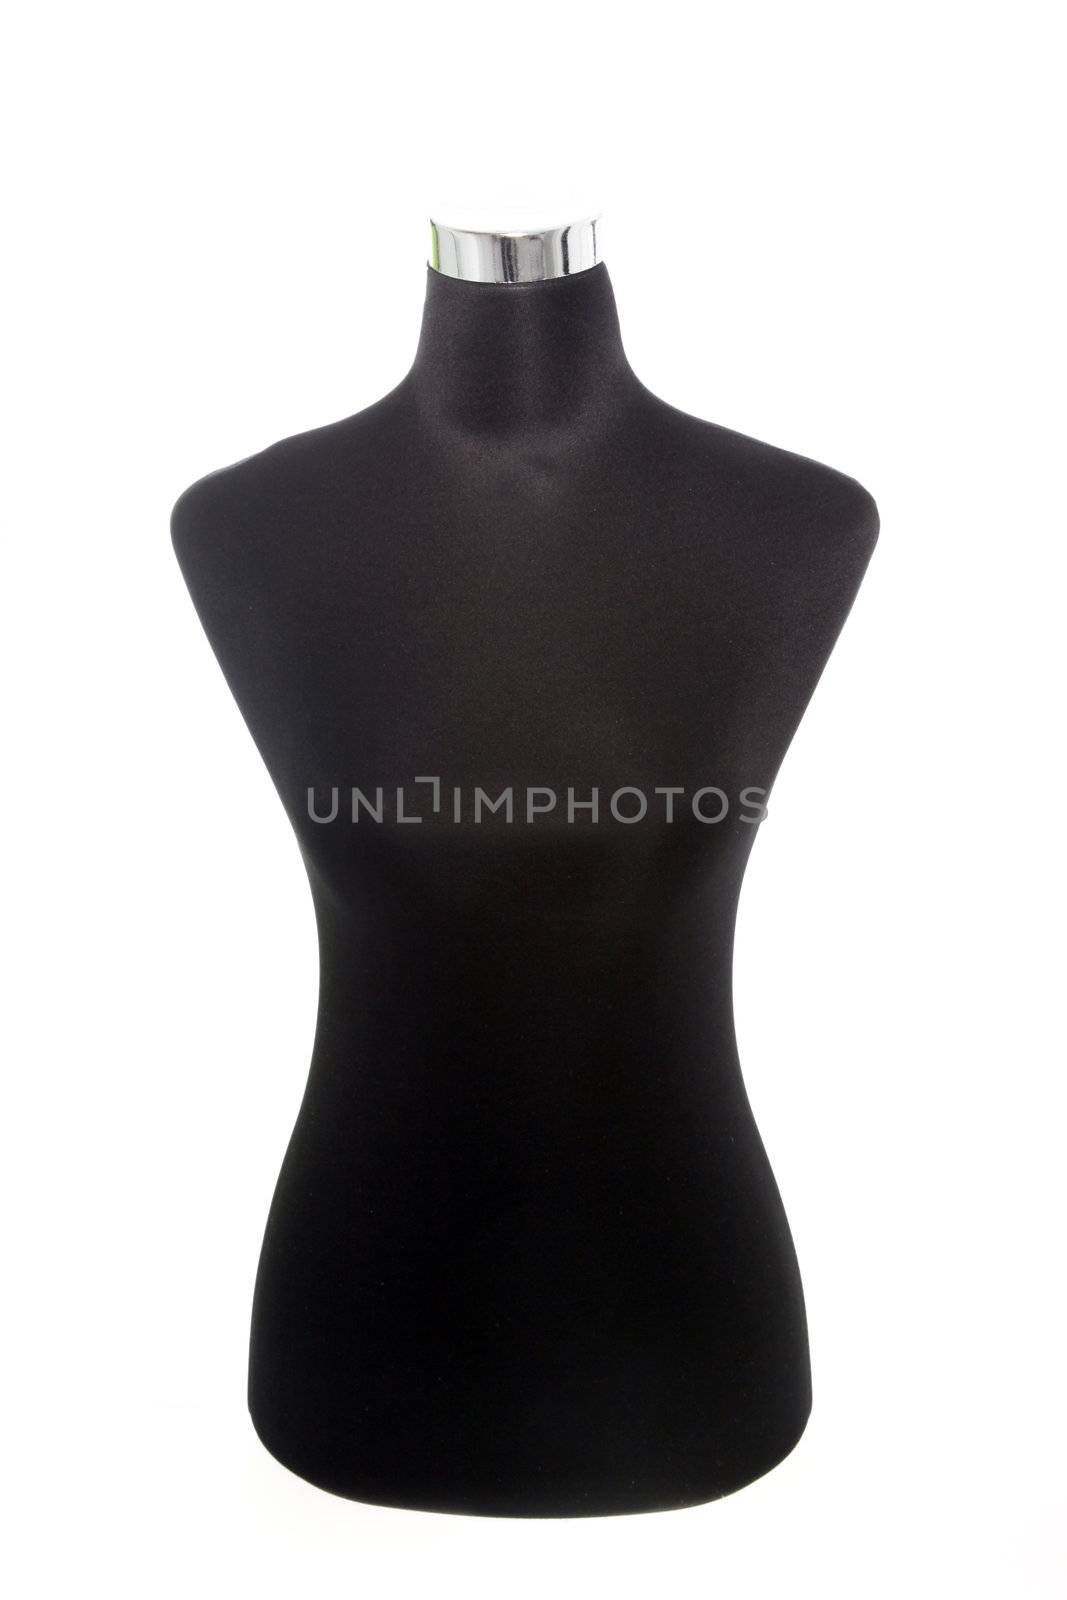 Modern black mannequin or dummy used for displaying fashion clothing or by a dressmaker or tailor as a human form on which to design and manufacture their garments